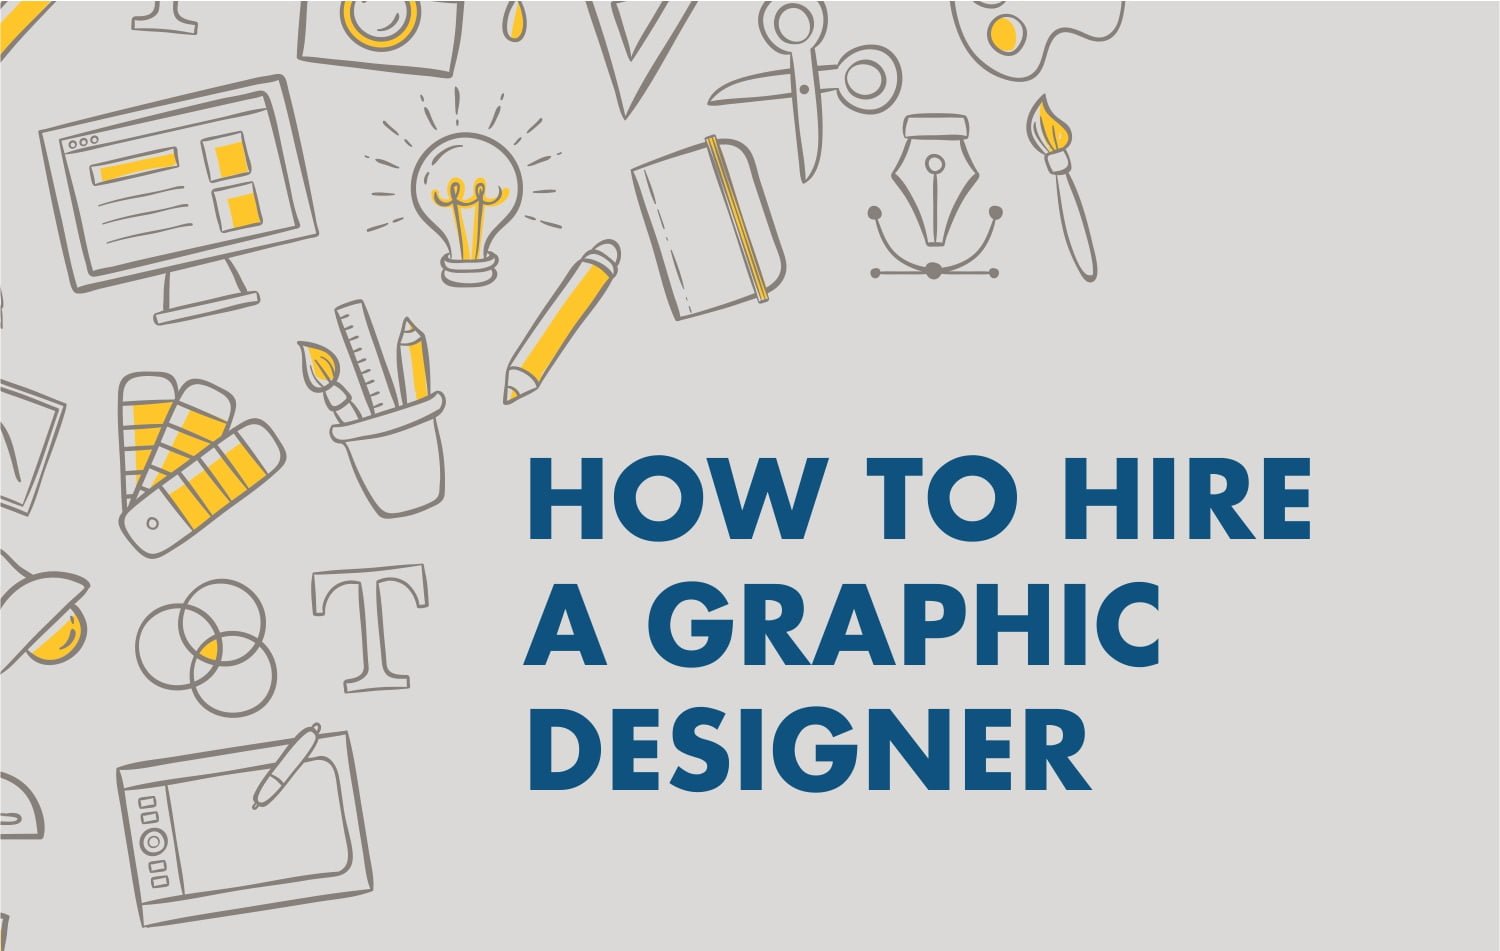 How to hire a graphic designer